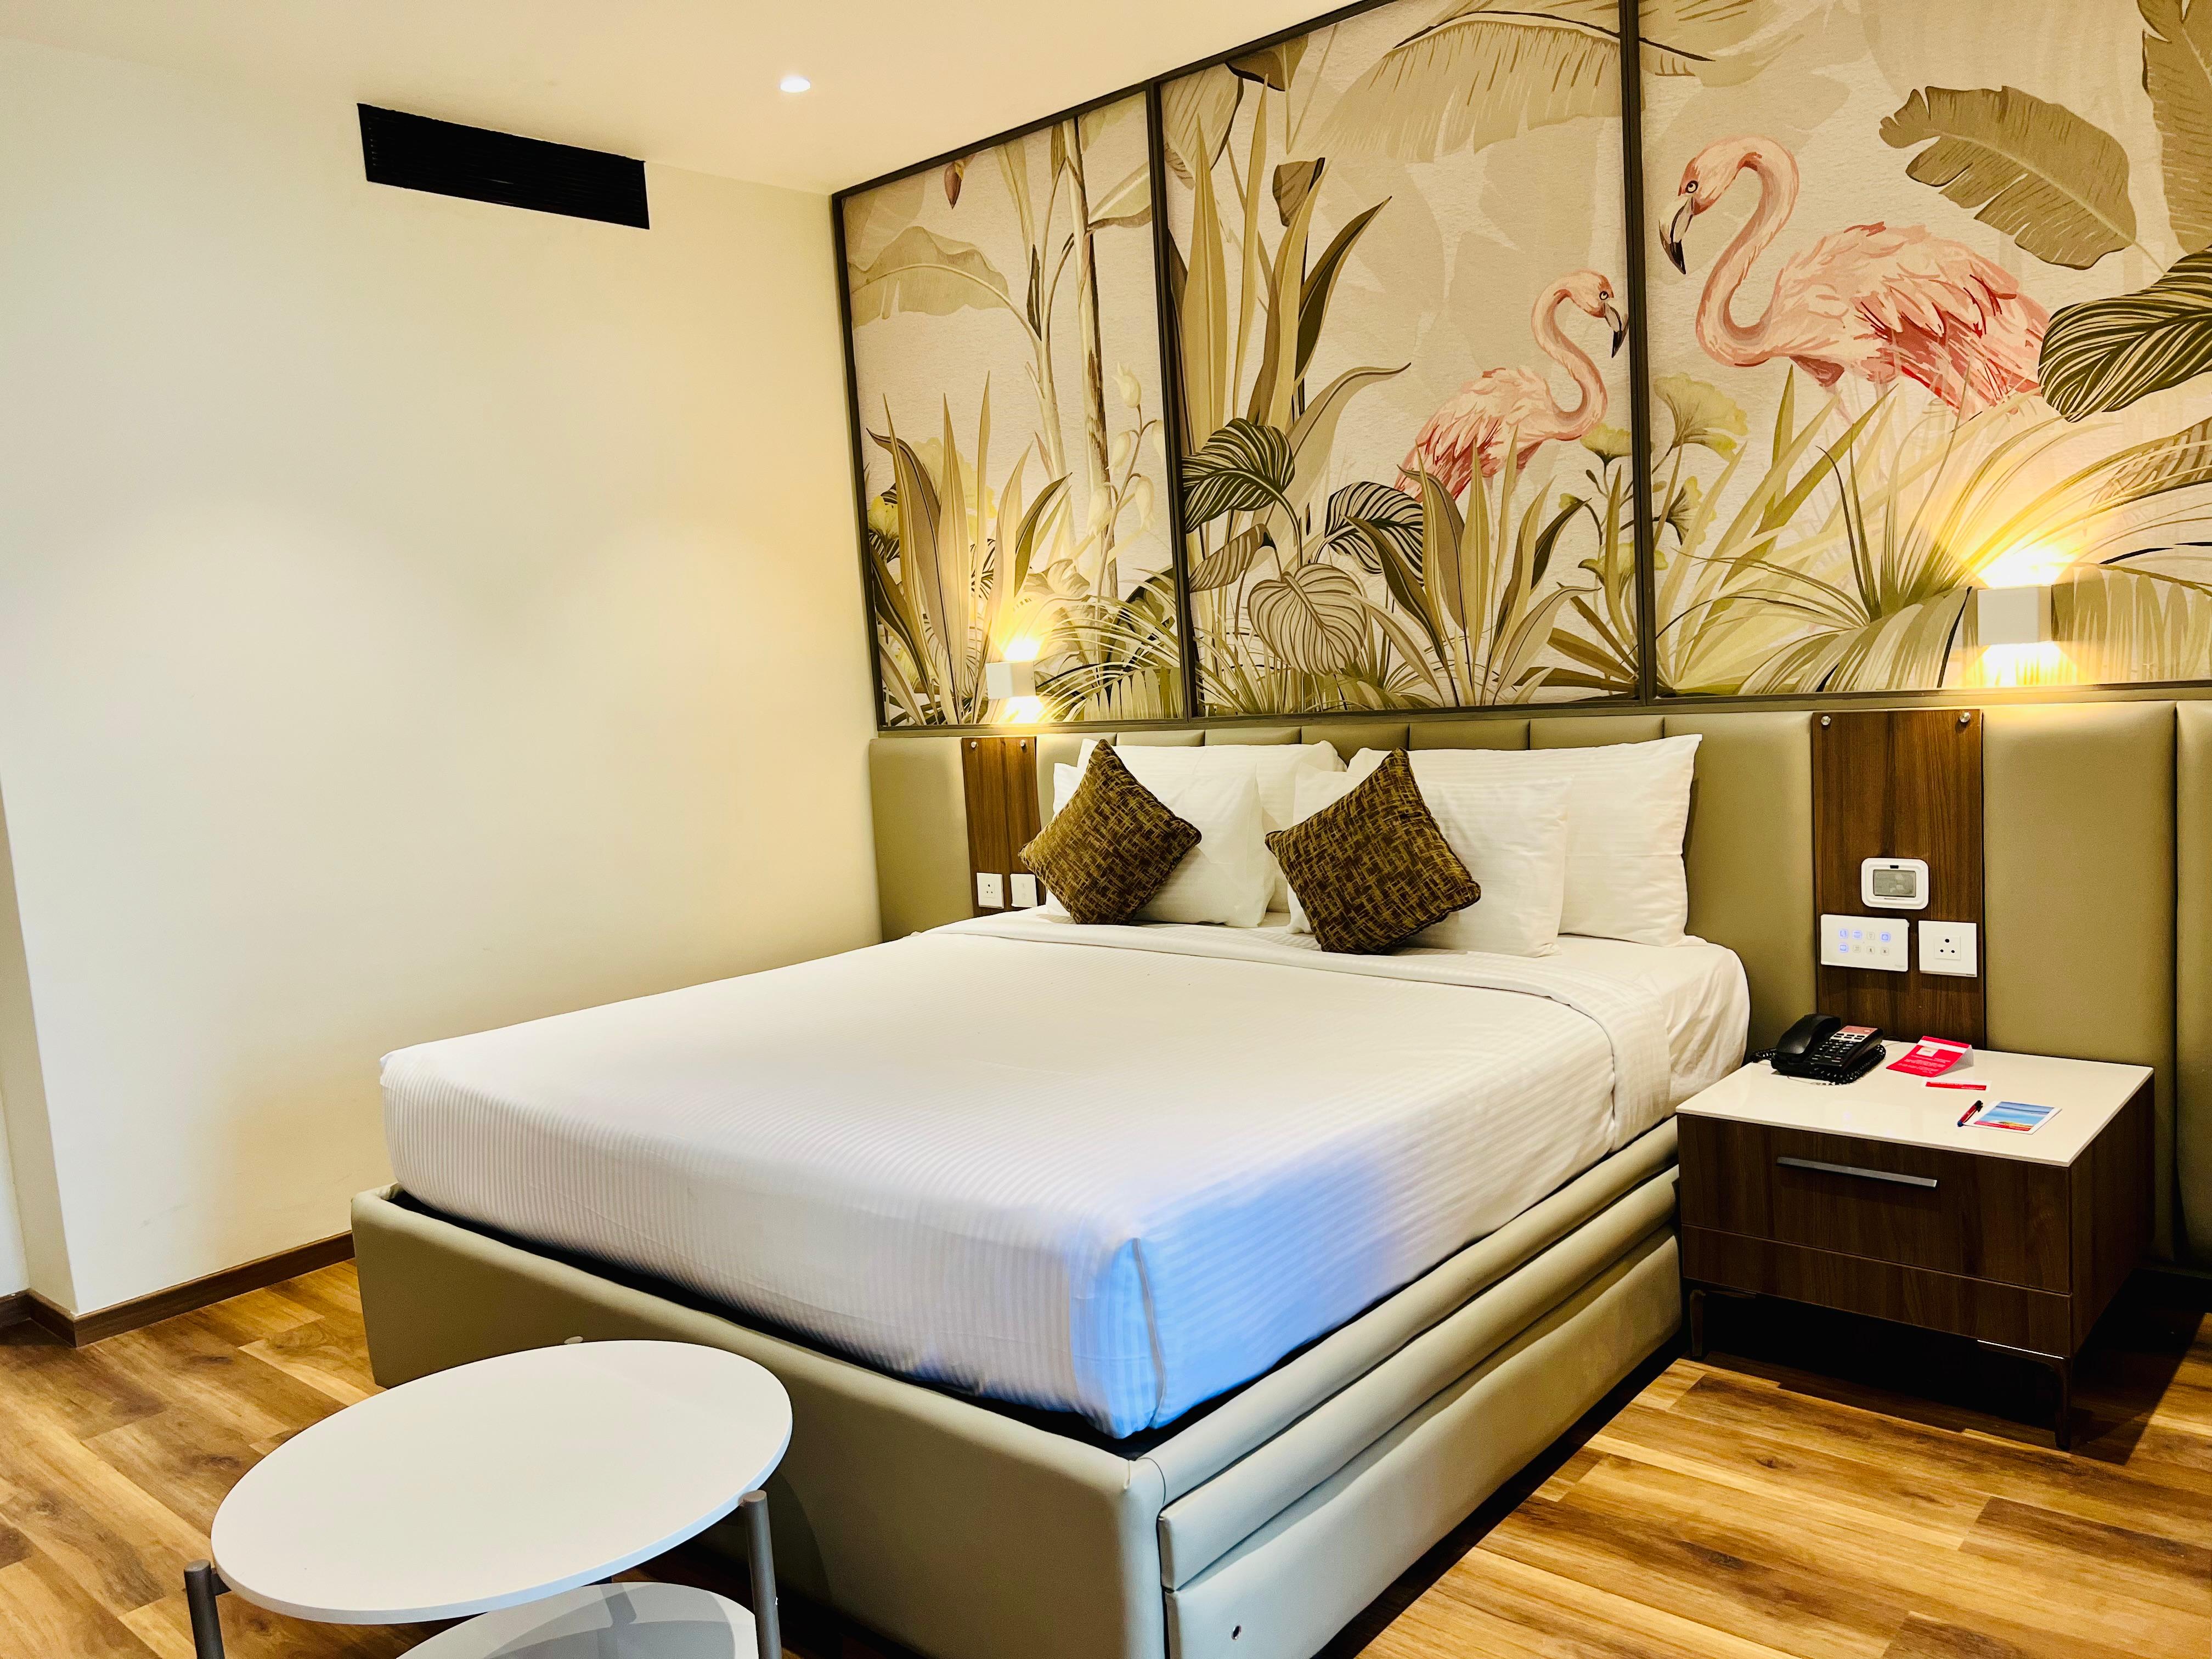 Ramada is a luxury backwater resort in kochi, which offers an uplifting blend of unique hospitality and bespoke wellness. Book our luxury lake view resort Now! luxury lake view rooms